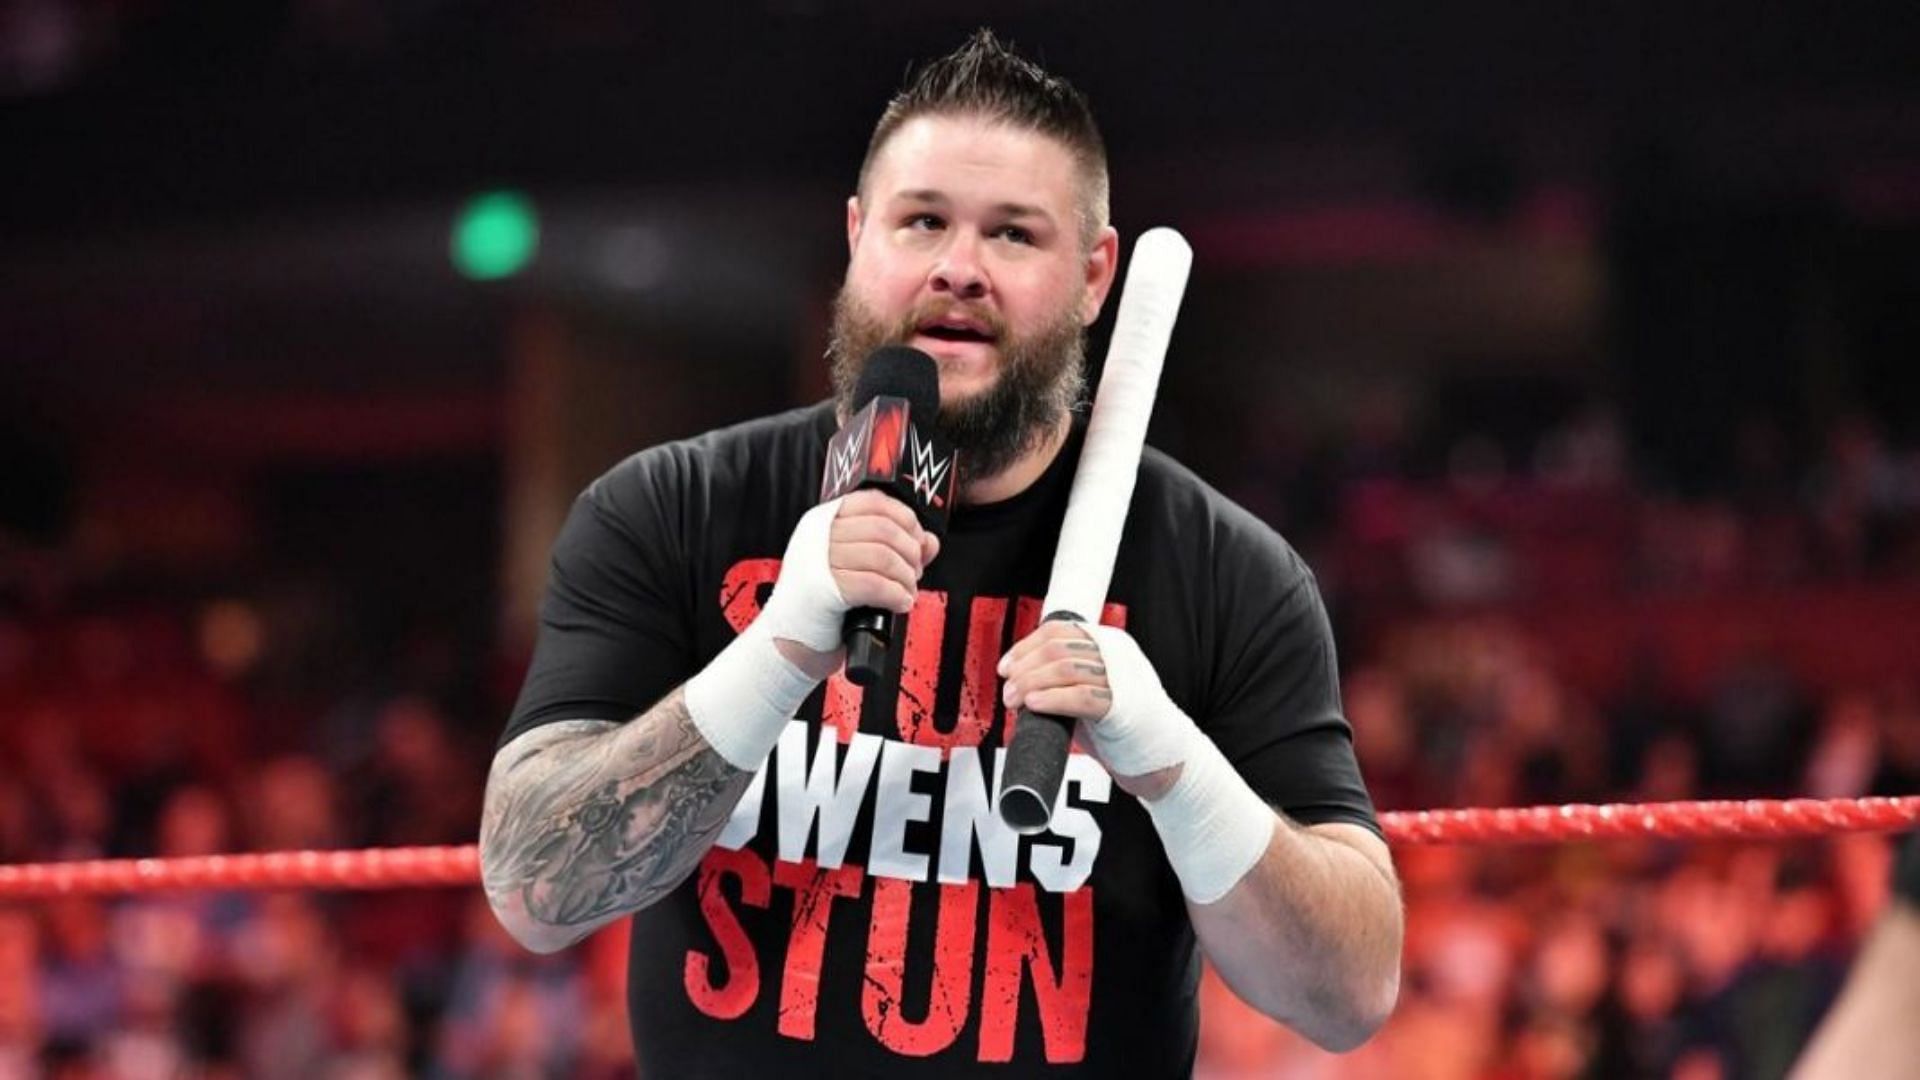 Kevin Owens reminds Sami Zayn of a special moment in their shared history.